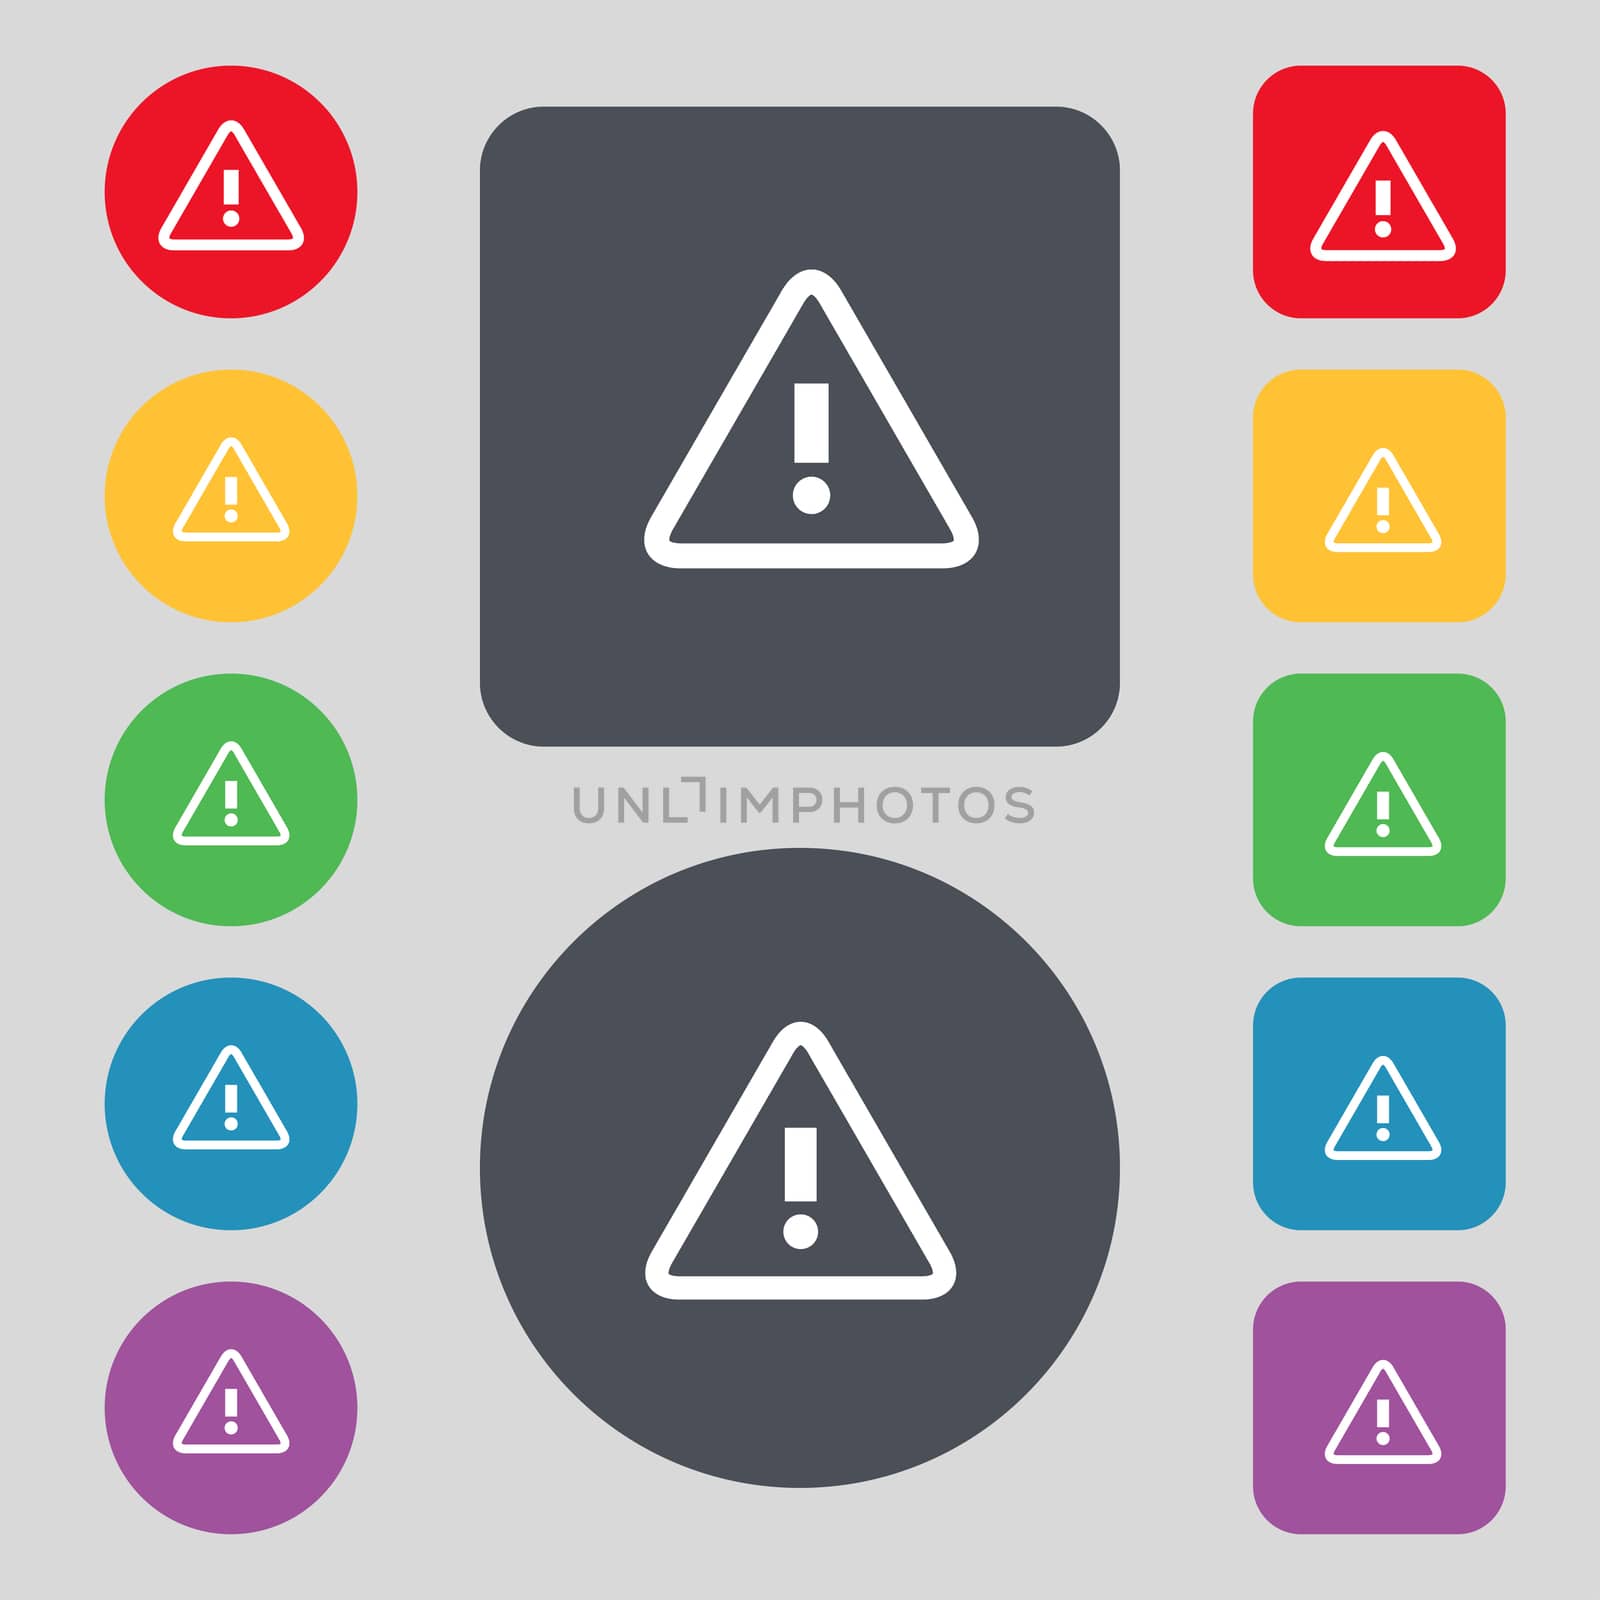 Attention caution sign icon. Exclamation mark. Hazard warning symbol. Set colour buttons illustration